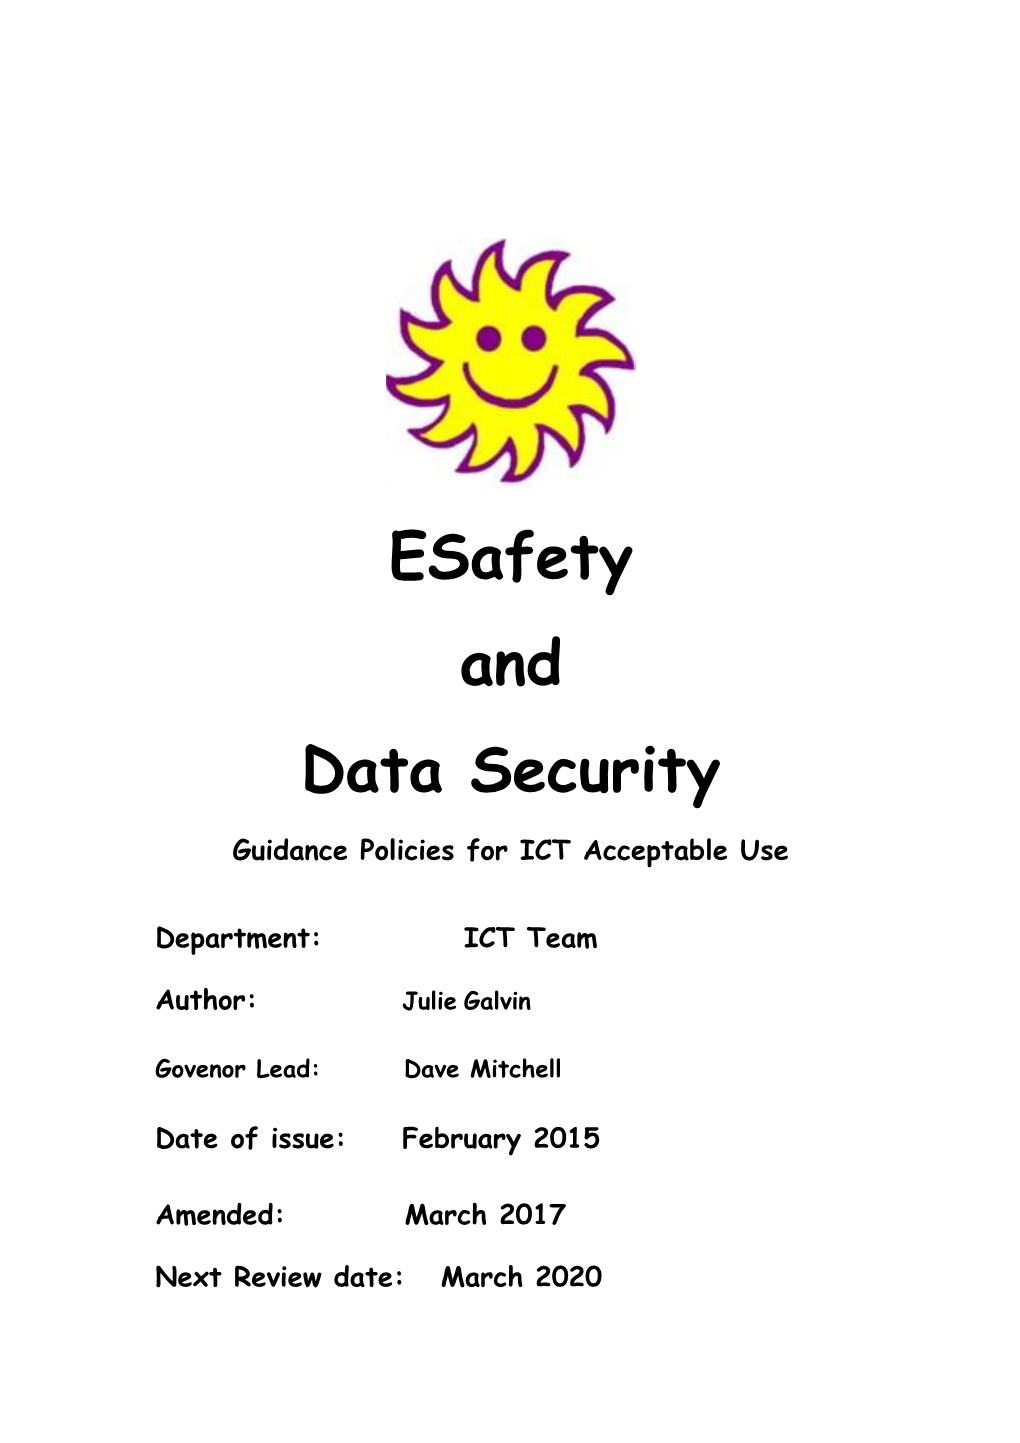 Guidance Policies for ICT Acceptable Use